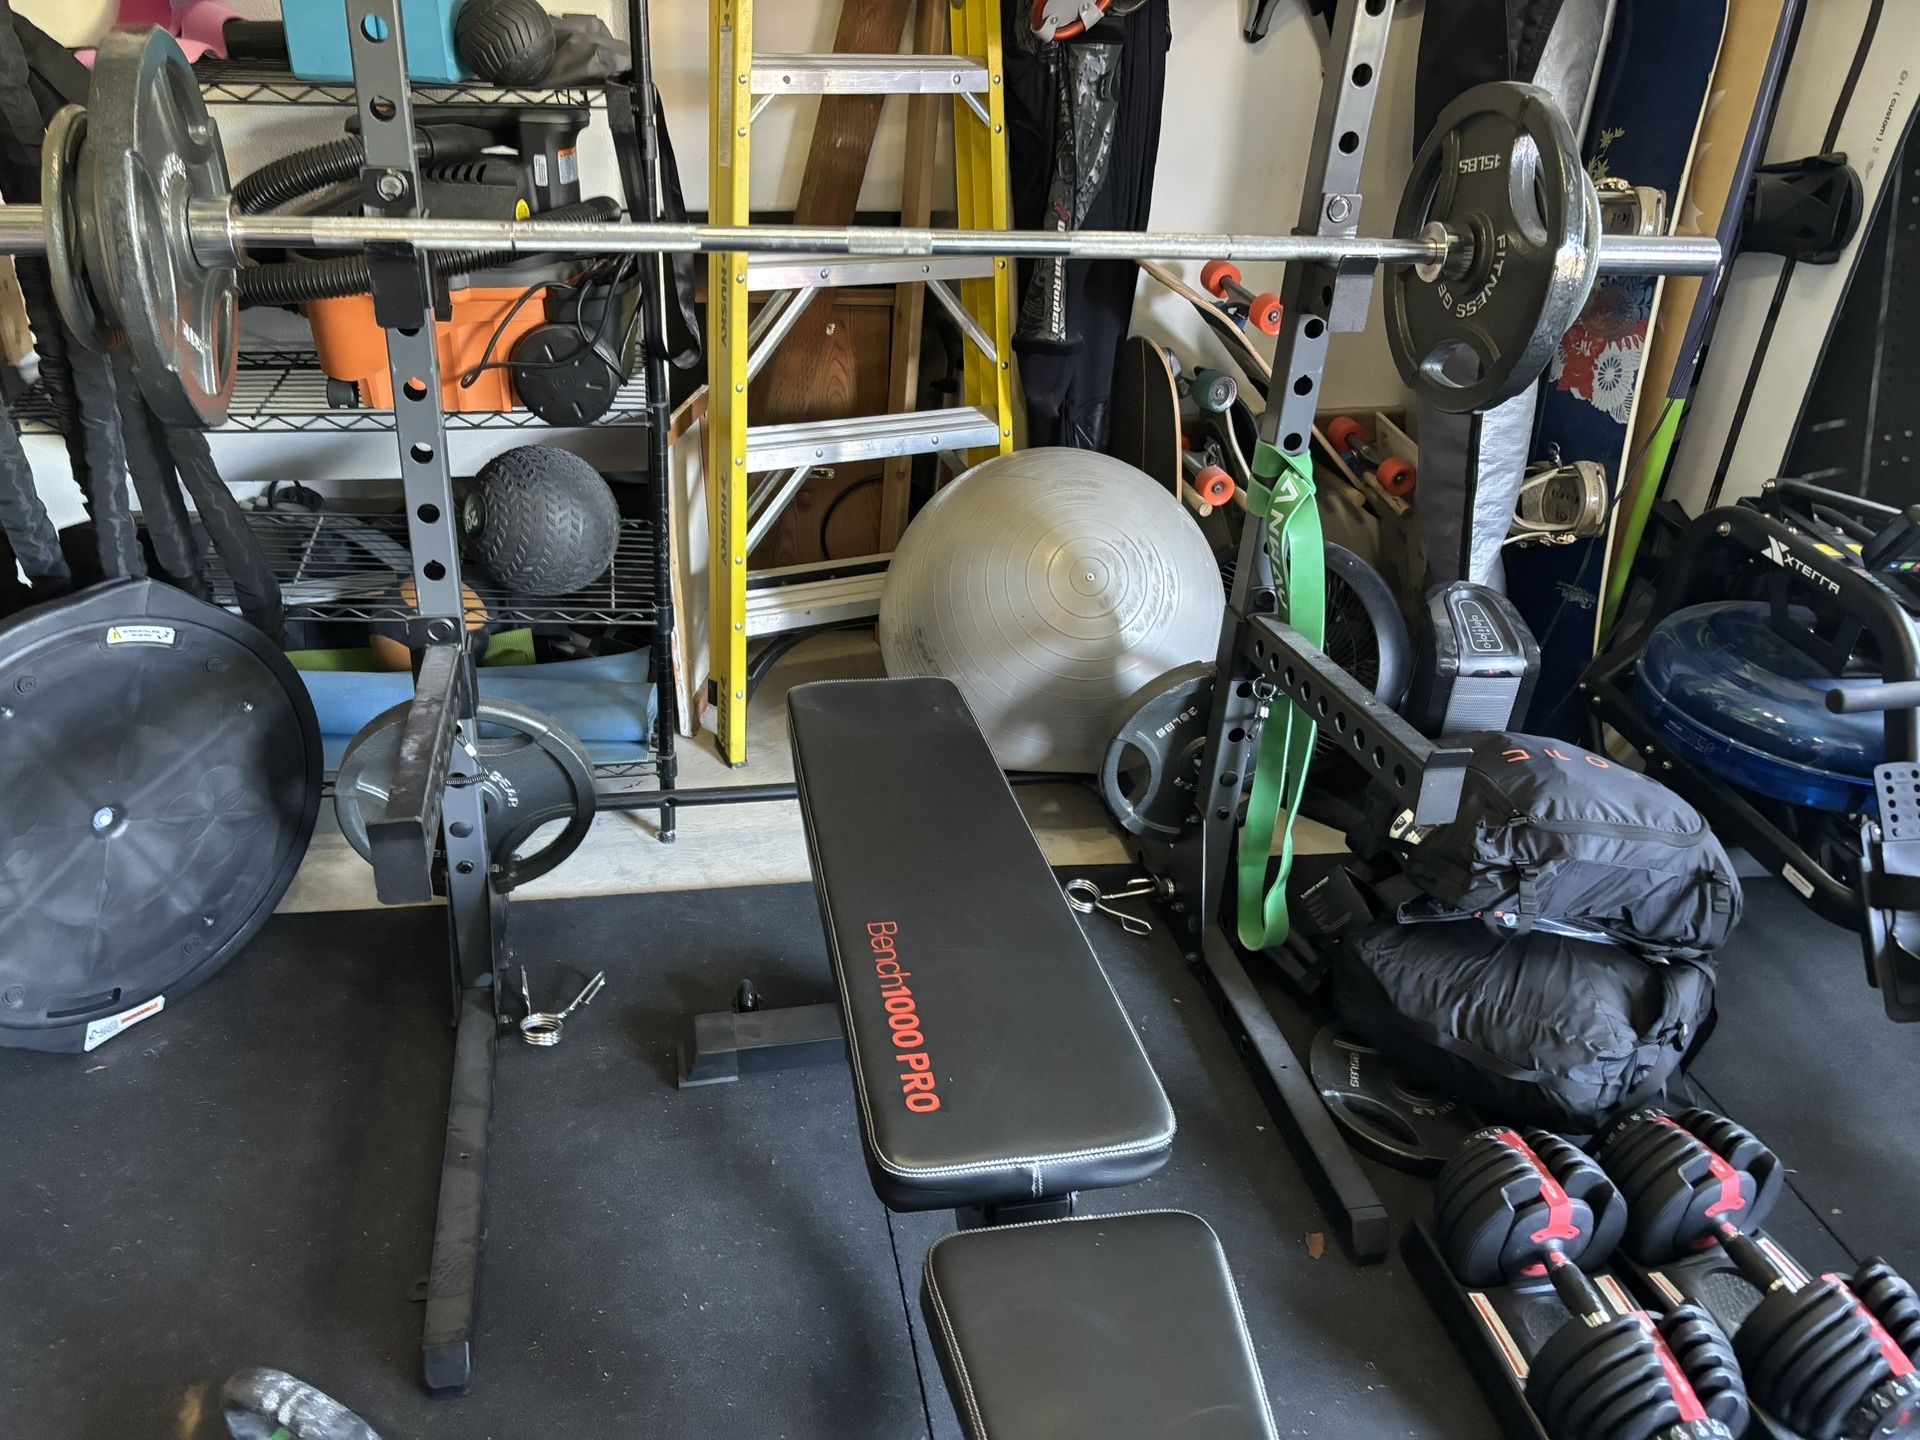 Weight Rack, Bench And Weights 